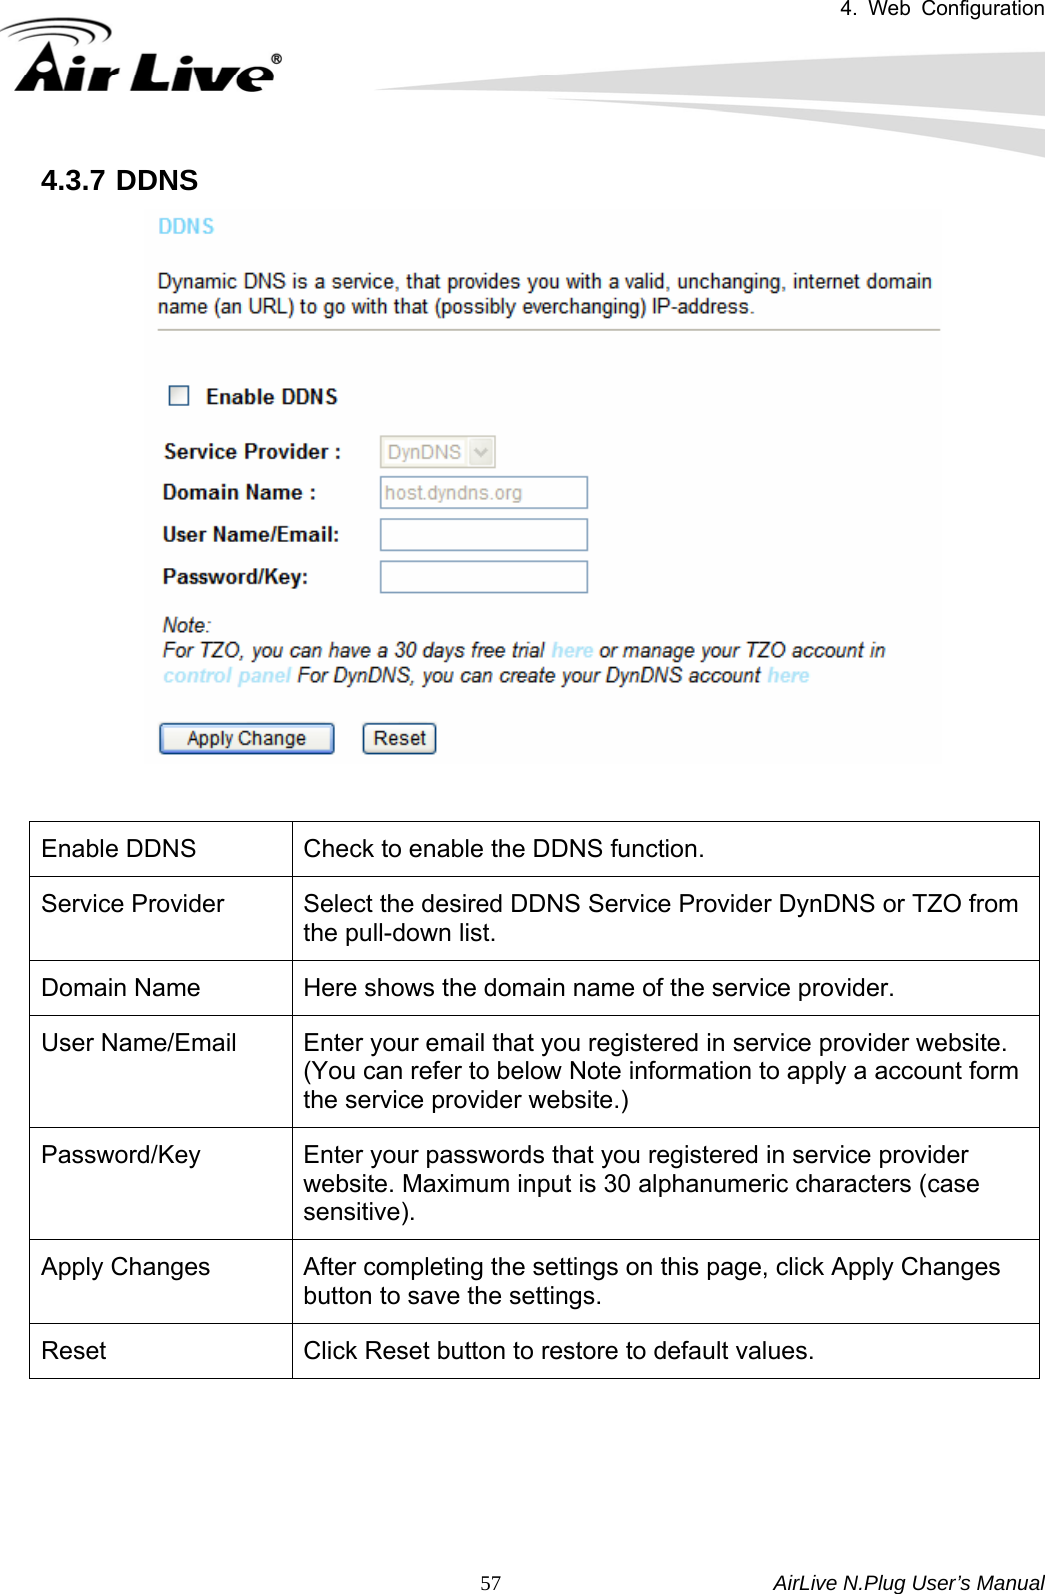 4. Web Configuration       AirLive N.Plug User’s Manual  574.3.7 DDNS    Enable DDNS  Check to enable the DDNS function. Service Provider  Select the desired DDNS Service Provider DynDNS or TZO from the pull-down list. Domain Name  Here shows the domain name of the service provider. User Name/Email  Enter your email that you registered in service provider website. (You can refer to below Note information to apply a account form the service provider website.) Password/Key  Enter your passwords that you registered in service provider website. Maximum input is 30 alphanumeric characters (case sensitive). Apply Changes  After completing the settings on this page, click Apply Changes button to save the settings. Reset  Click Reset button to restore to default values.      